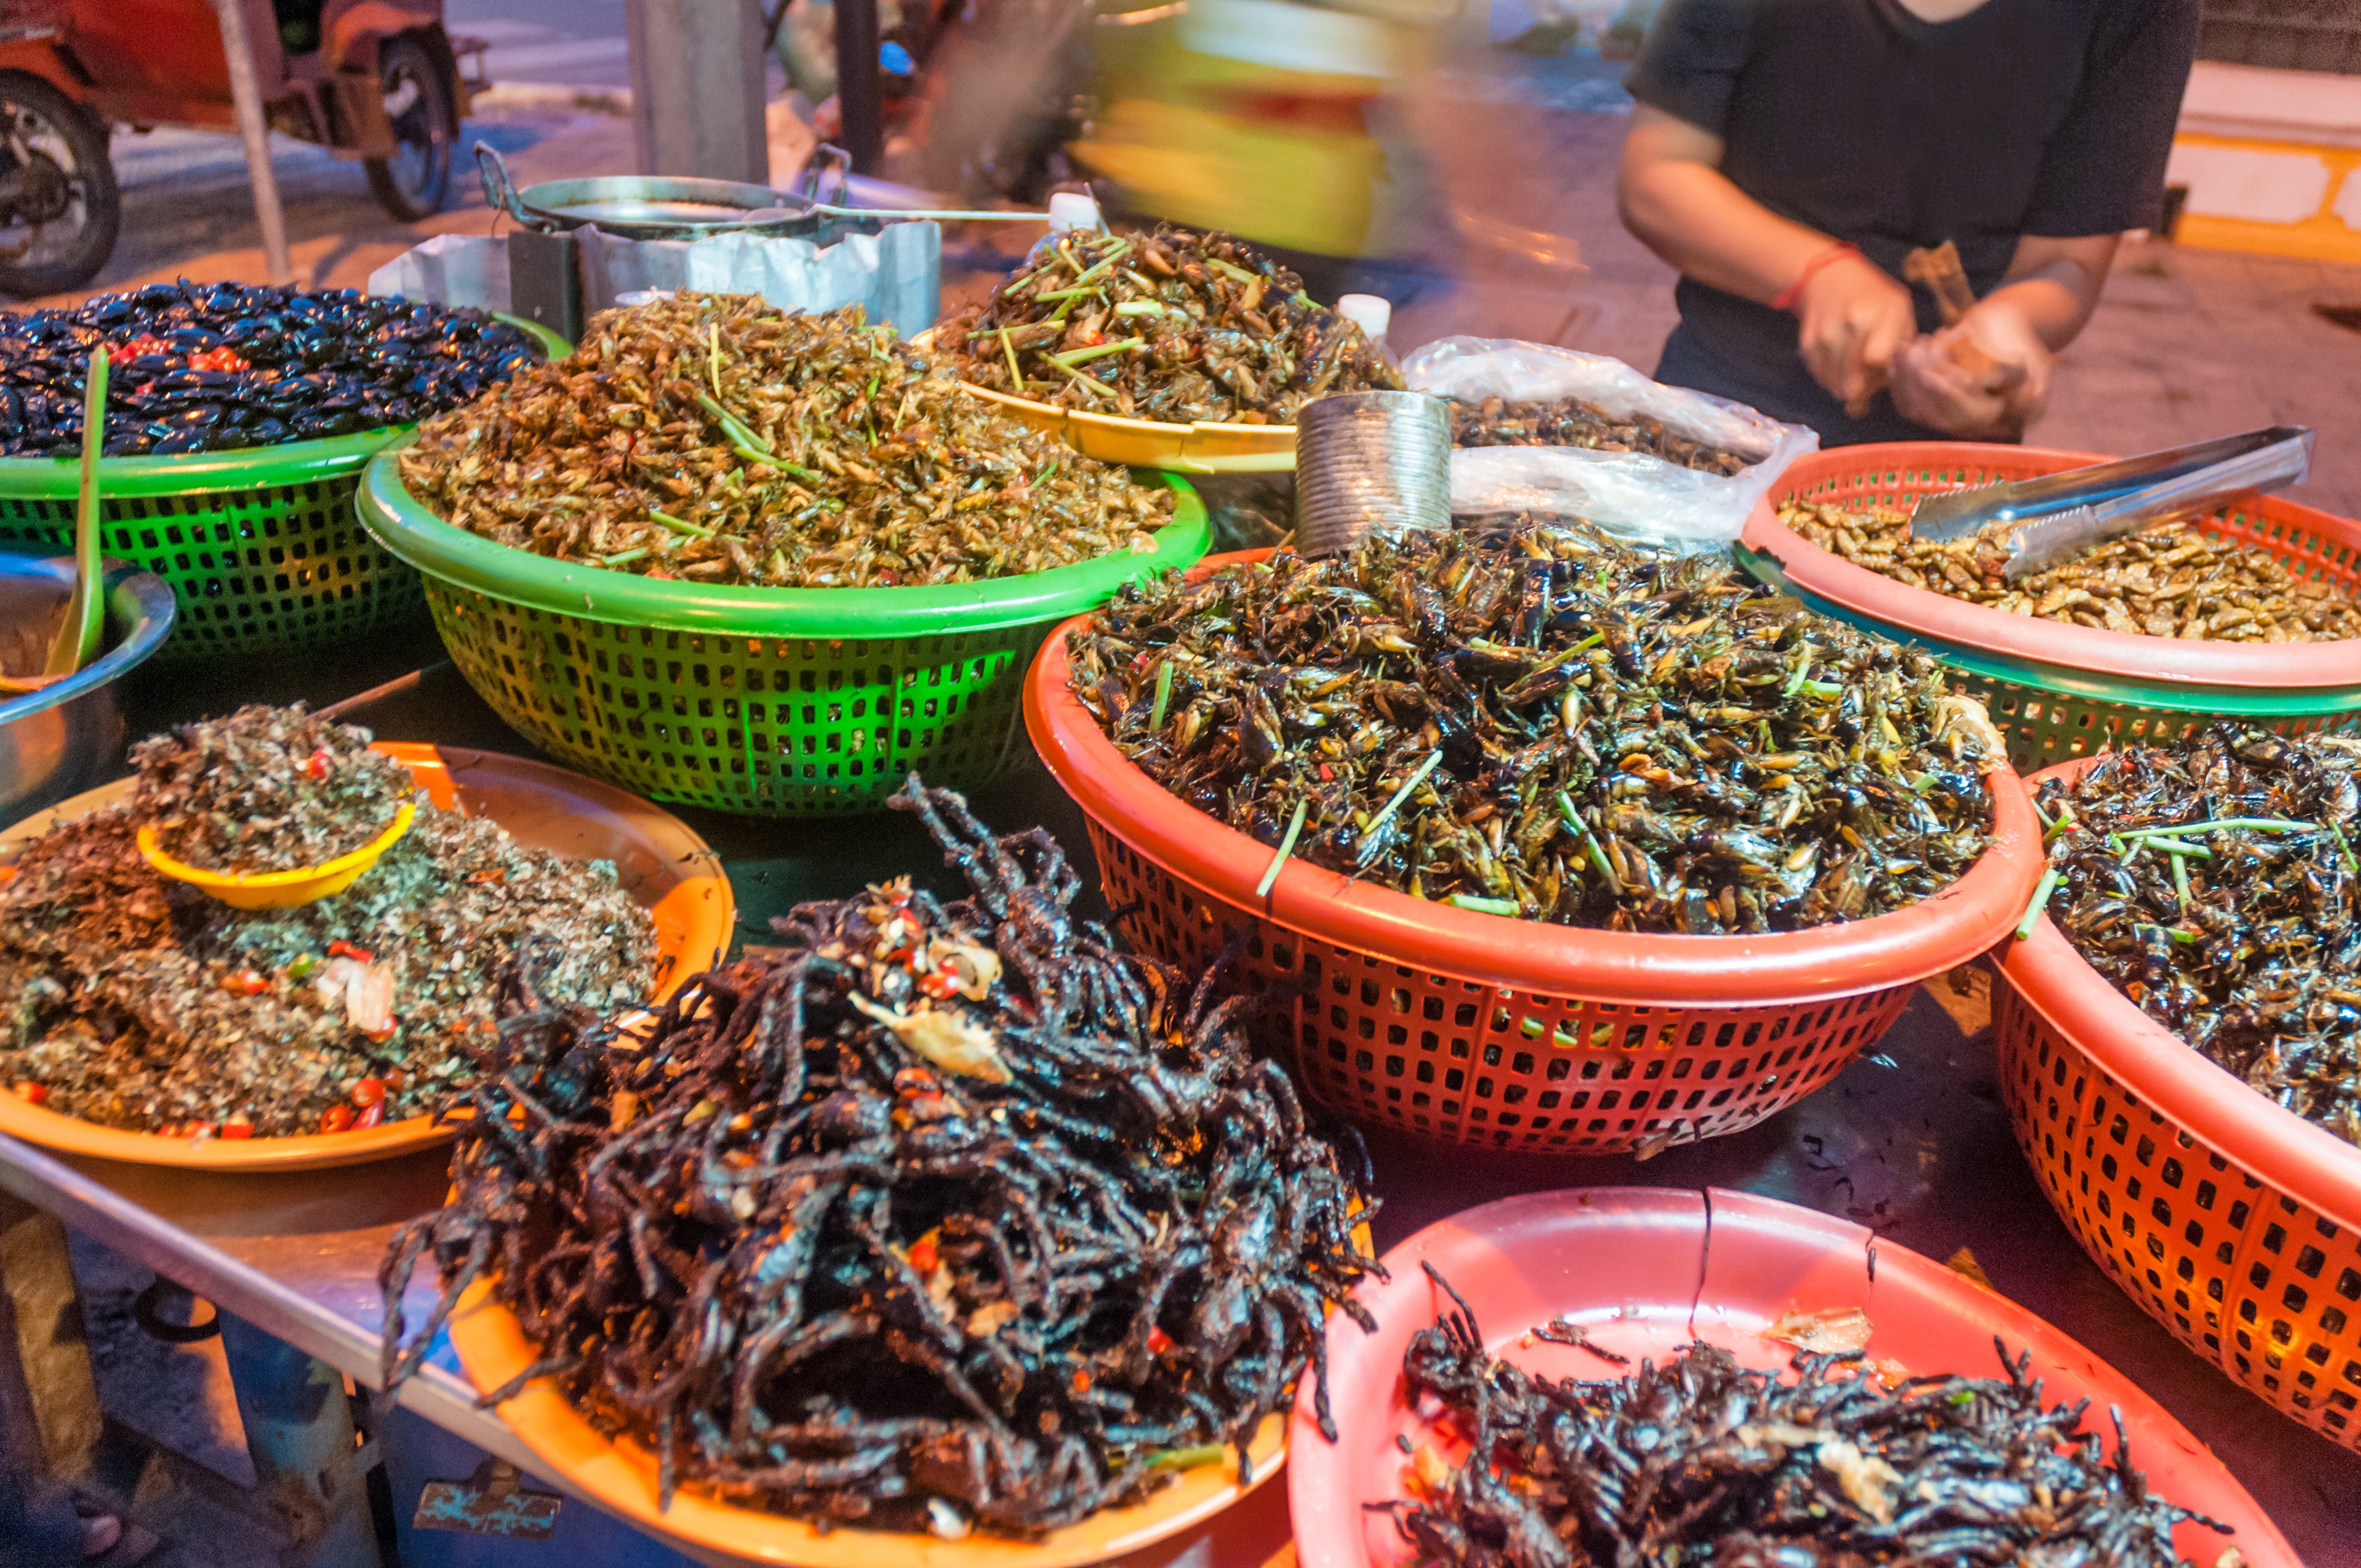 Bugbear: edible insects for sale in Phnom Penh, Cambodia